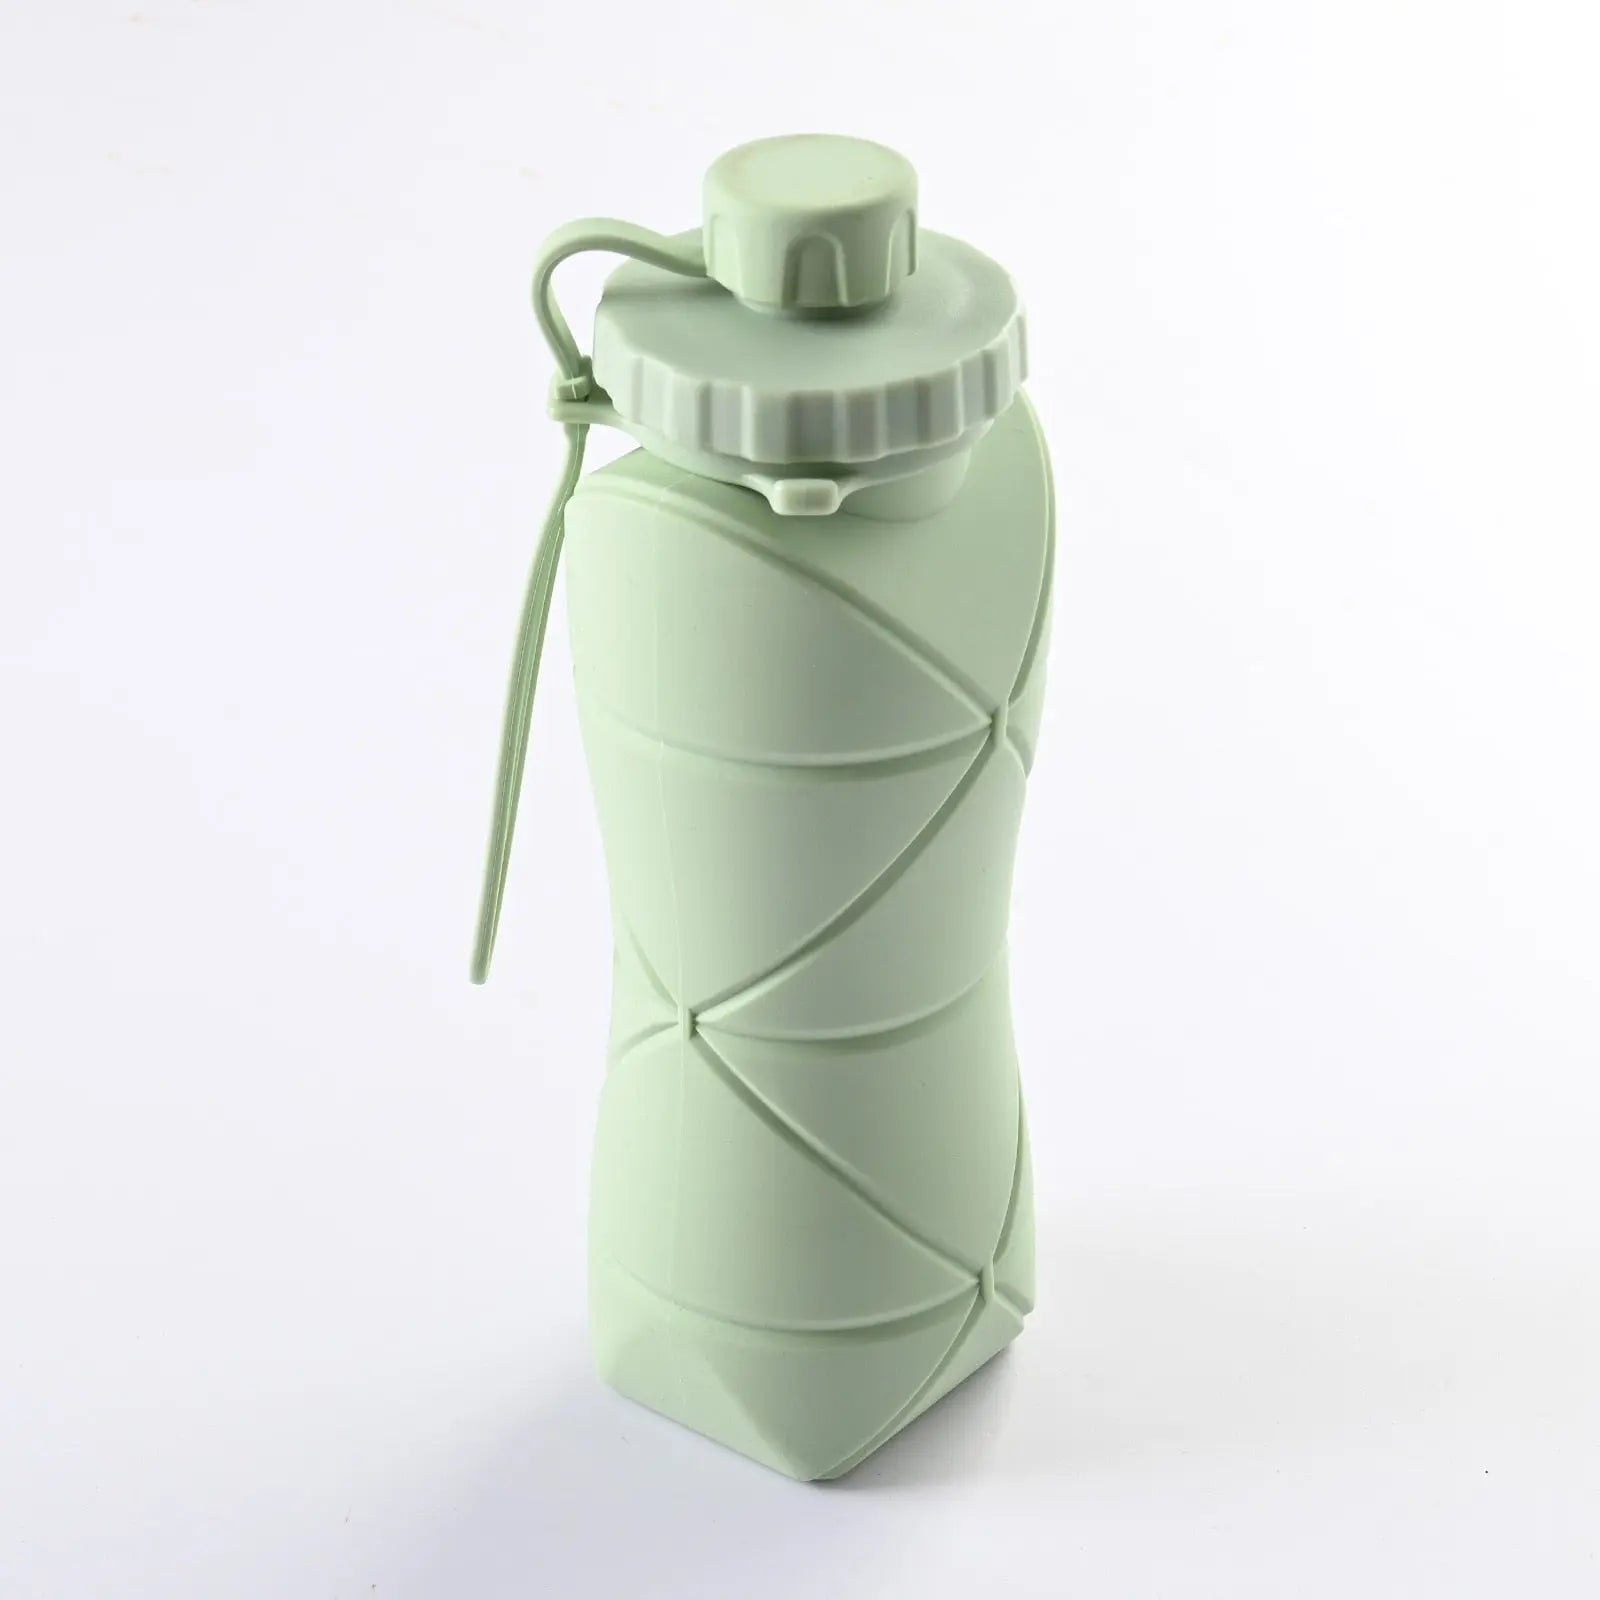 Foldable Silicone Water Bottle Green